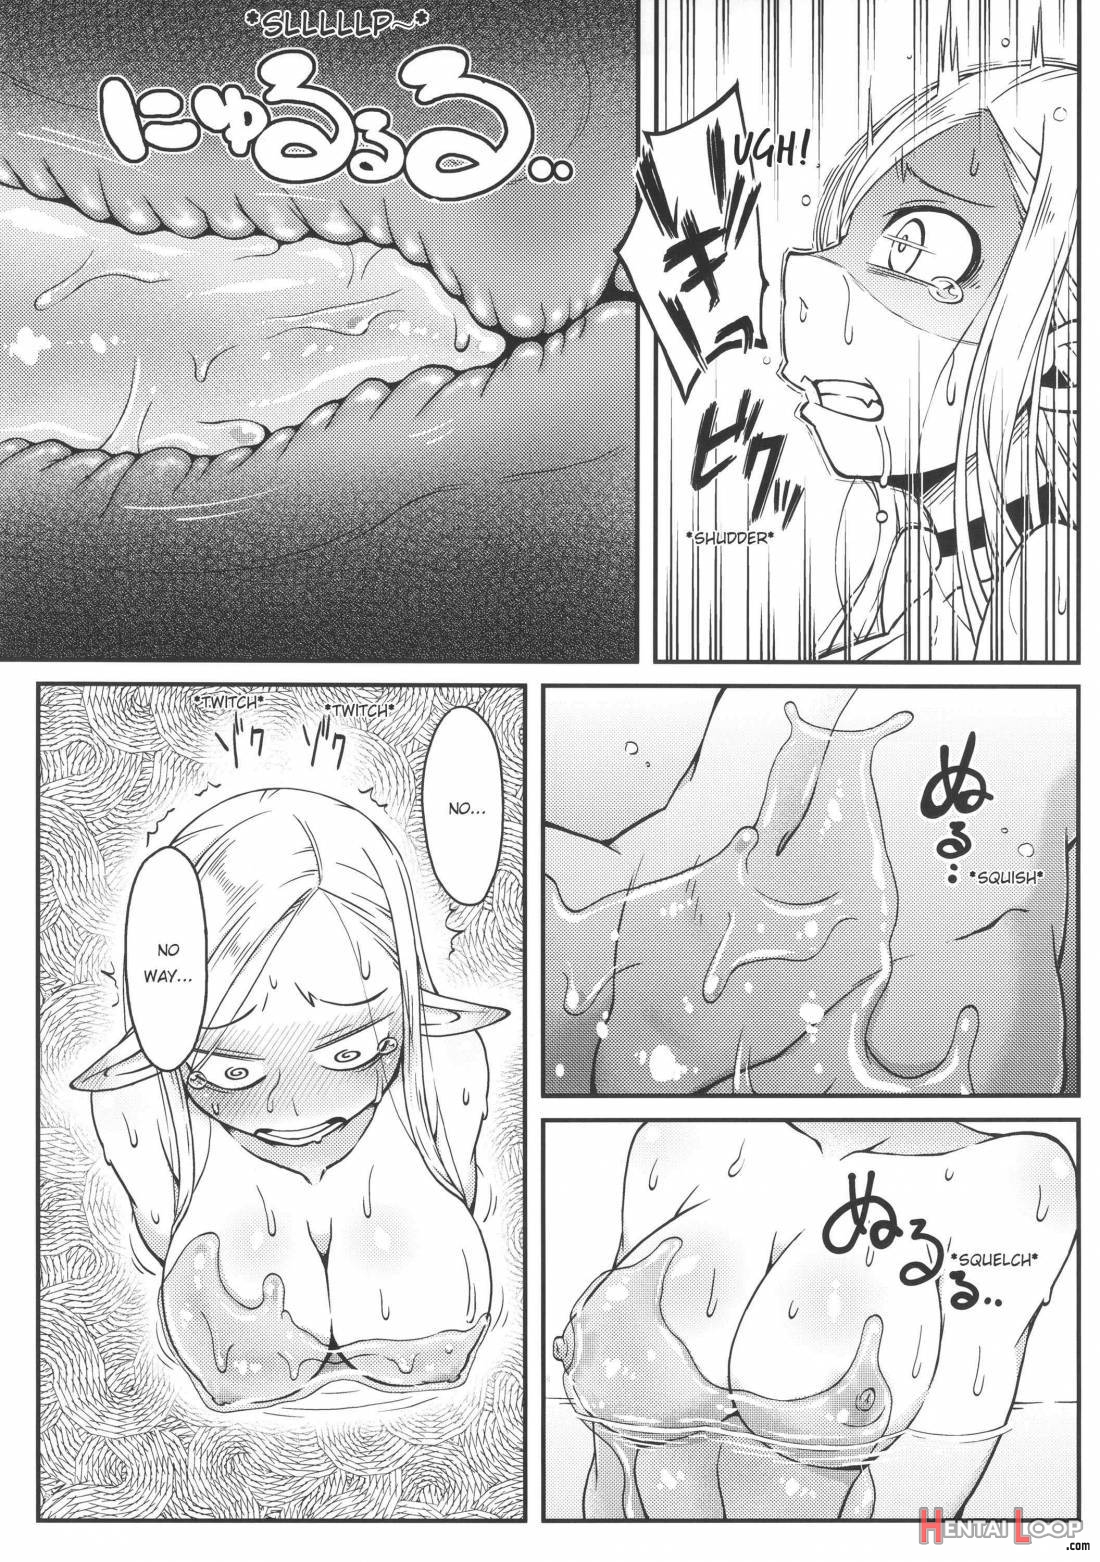 Dungeon Cooking ~Marcille no Slime Zoe~ page 12